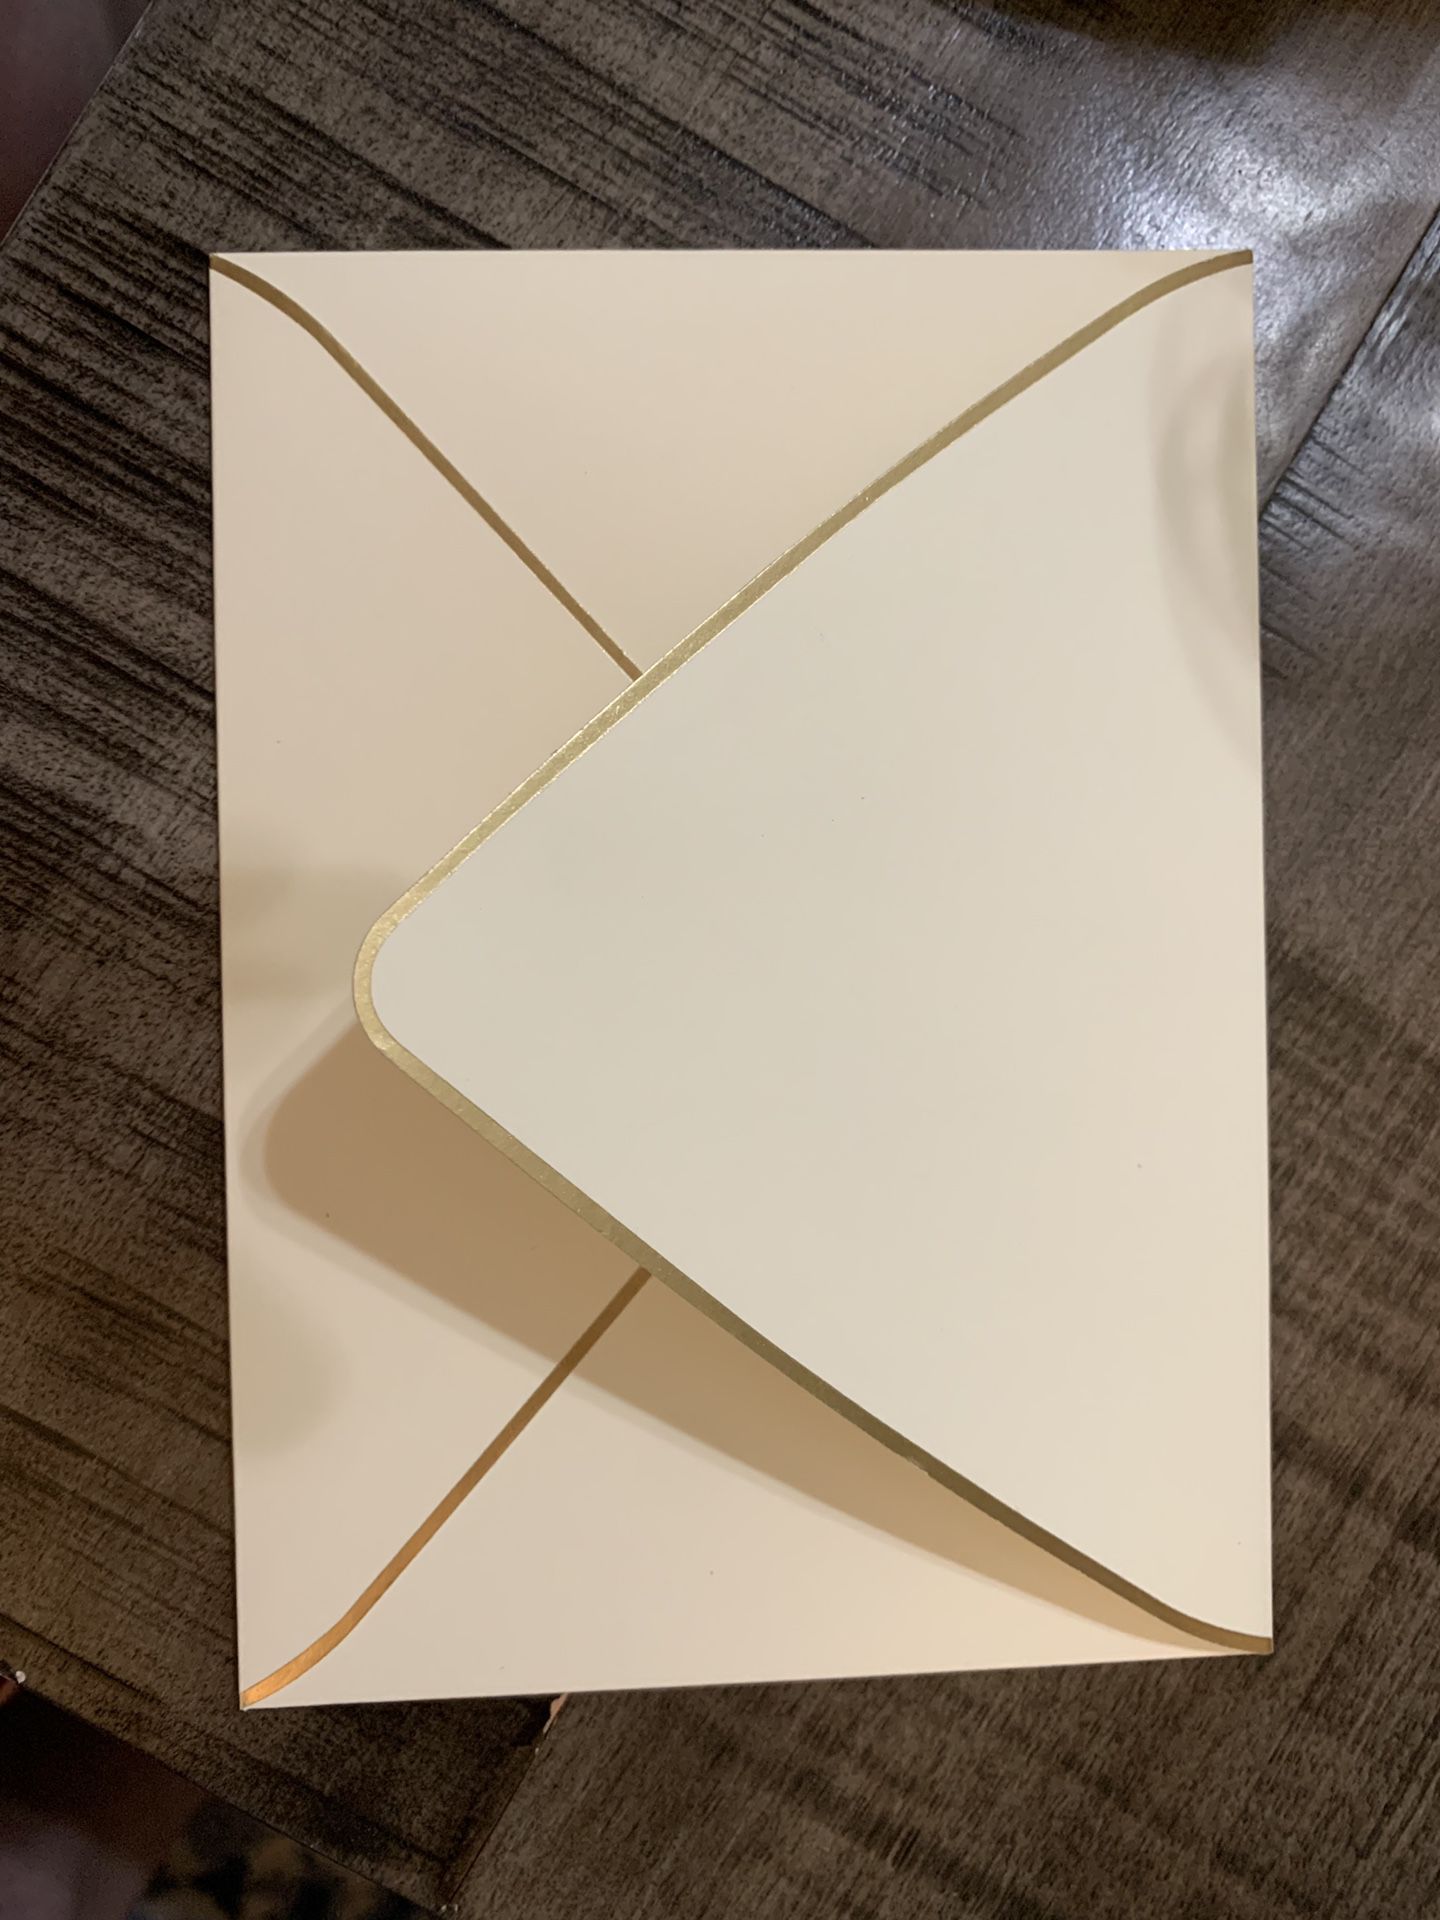 34 high quality ivory and gold wedding envelopes- nice weight